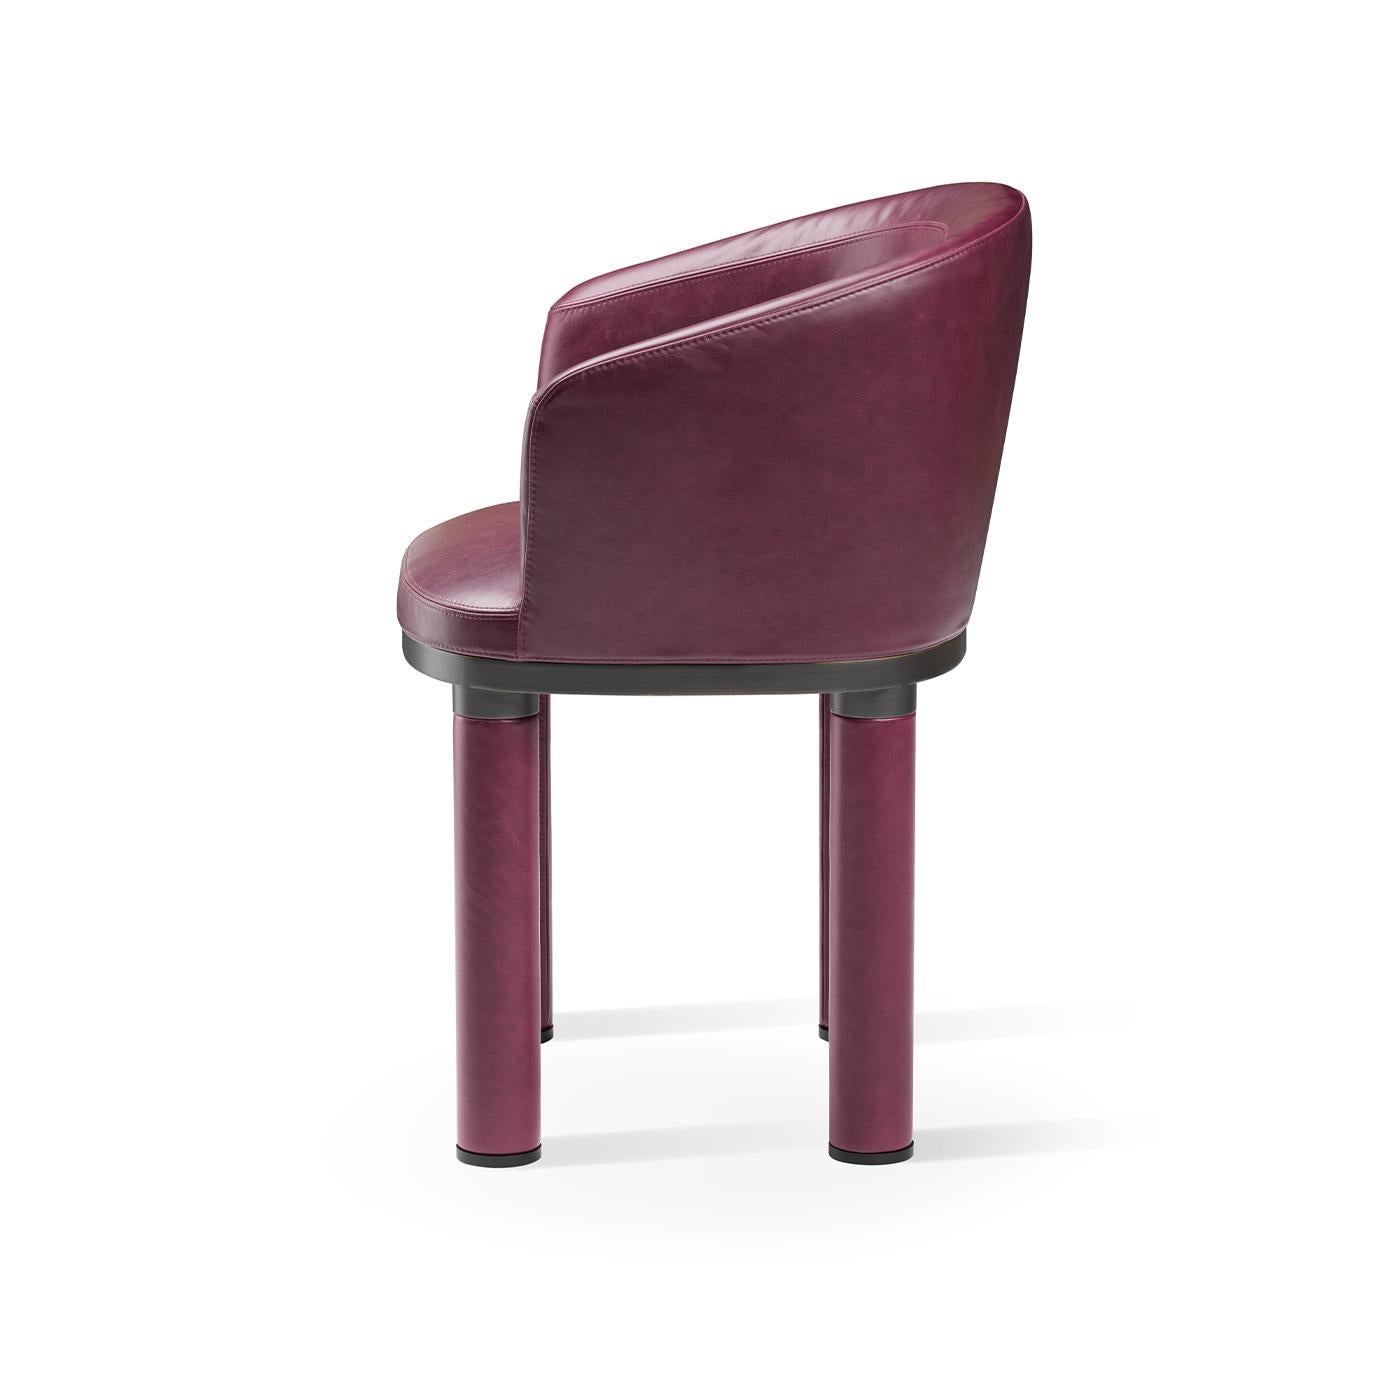 Distinguished by an eye-catching purple tone, this armchair will make an elegant statement in a contemporary interior, especially when paired with others from the same series for a refined and cohesive look. Simple yet stylish, it features a black